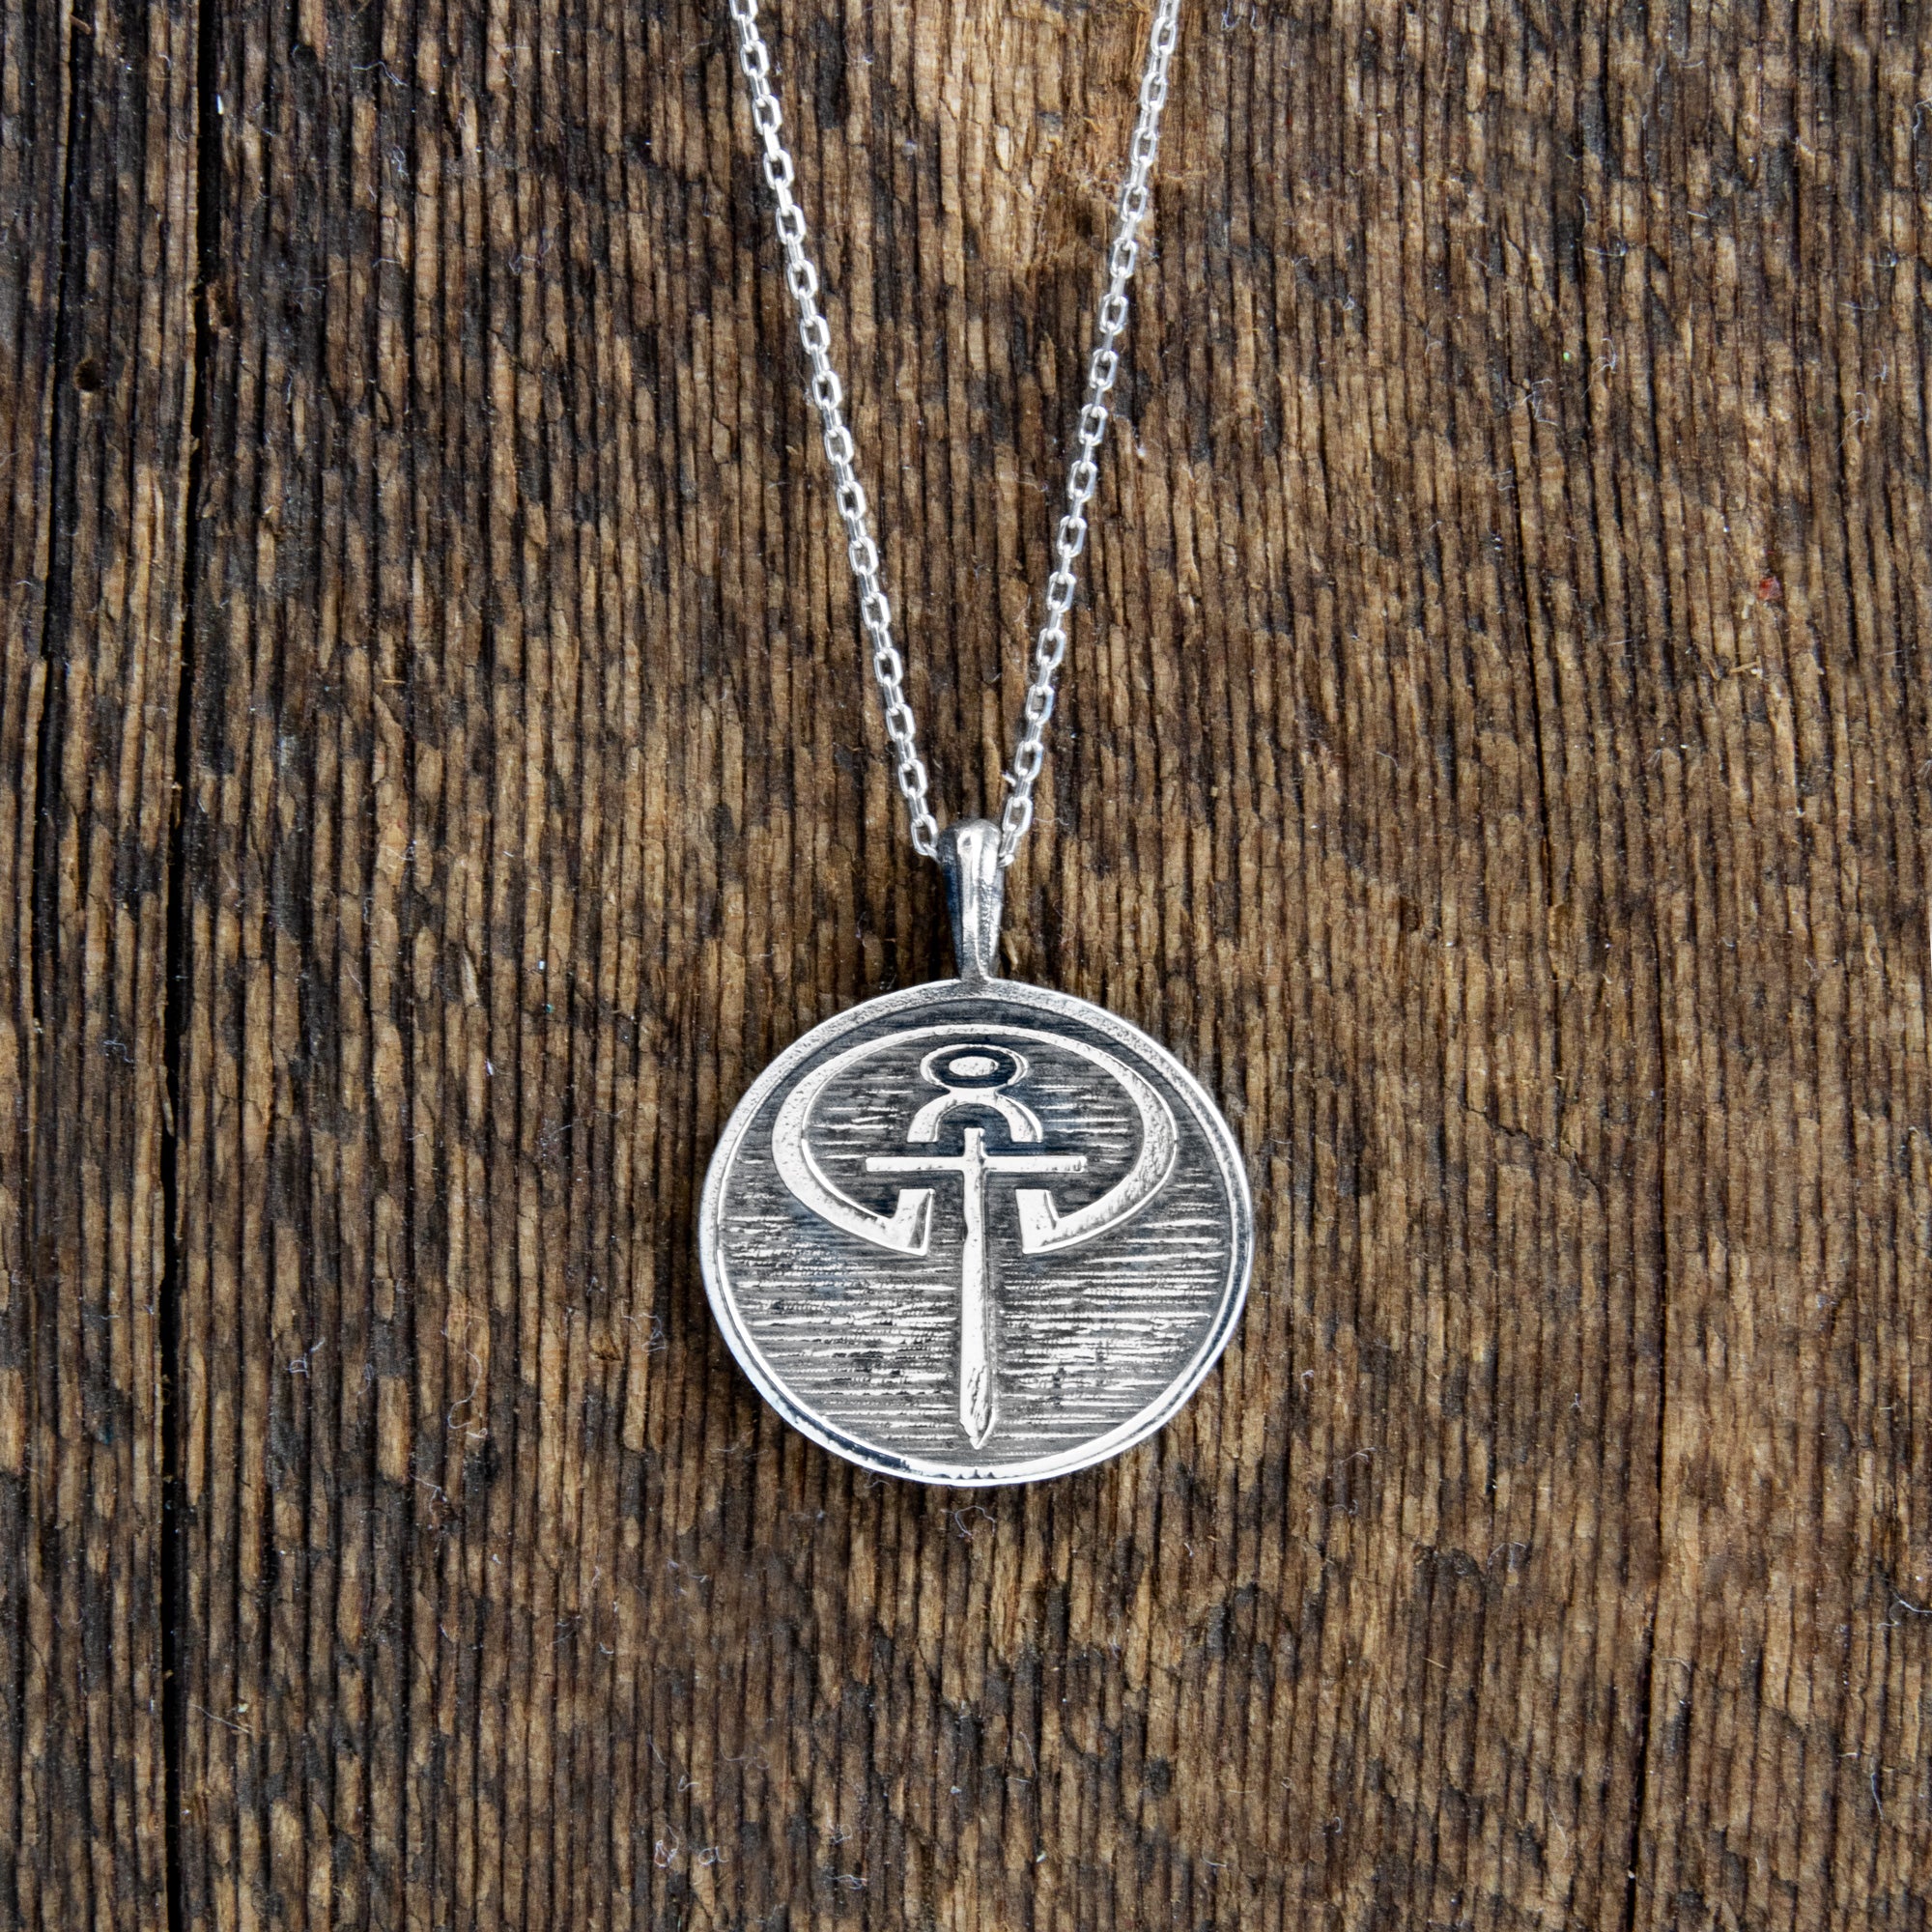 Men's The Journey Necklace Plain - Influencers Ministries 925 Sterling Silver Pendant Necklace and 24 Inch Stainless Steel Chain